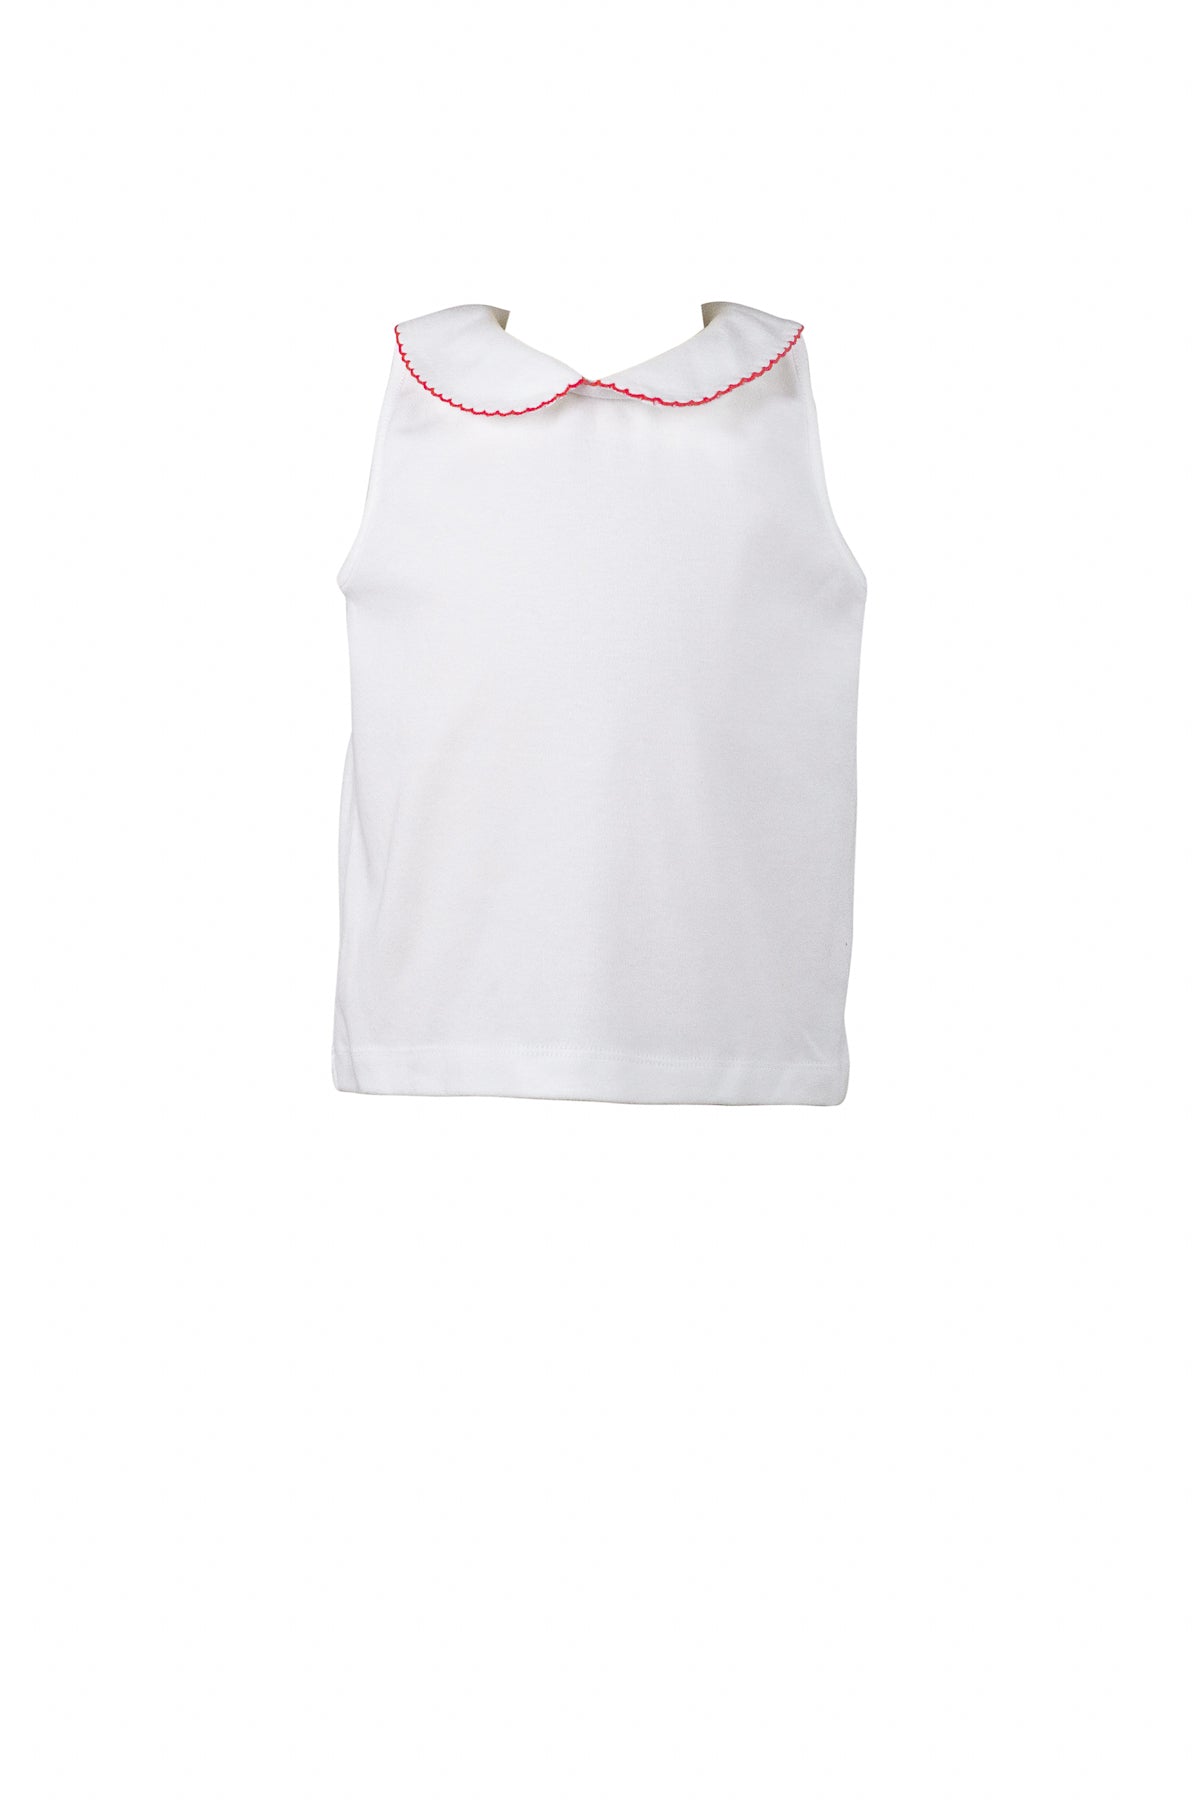 White Peter Pan Top with Red Trim